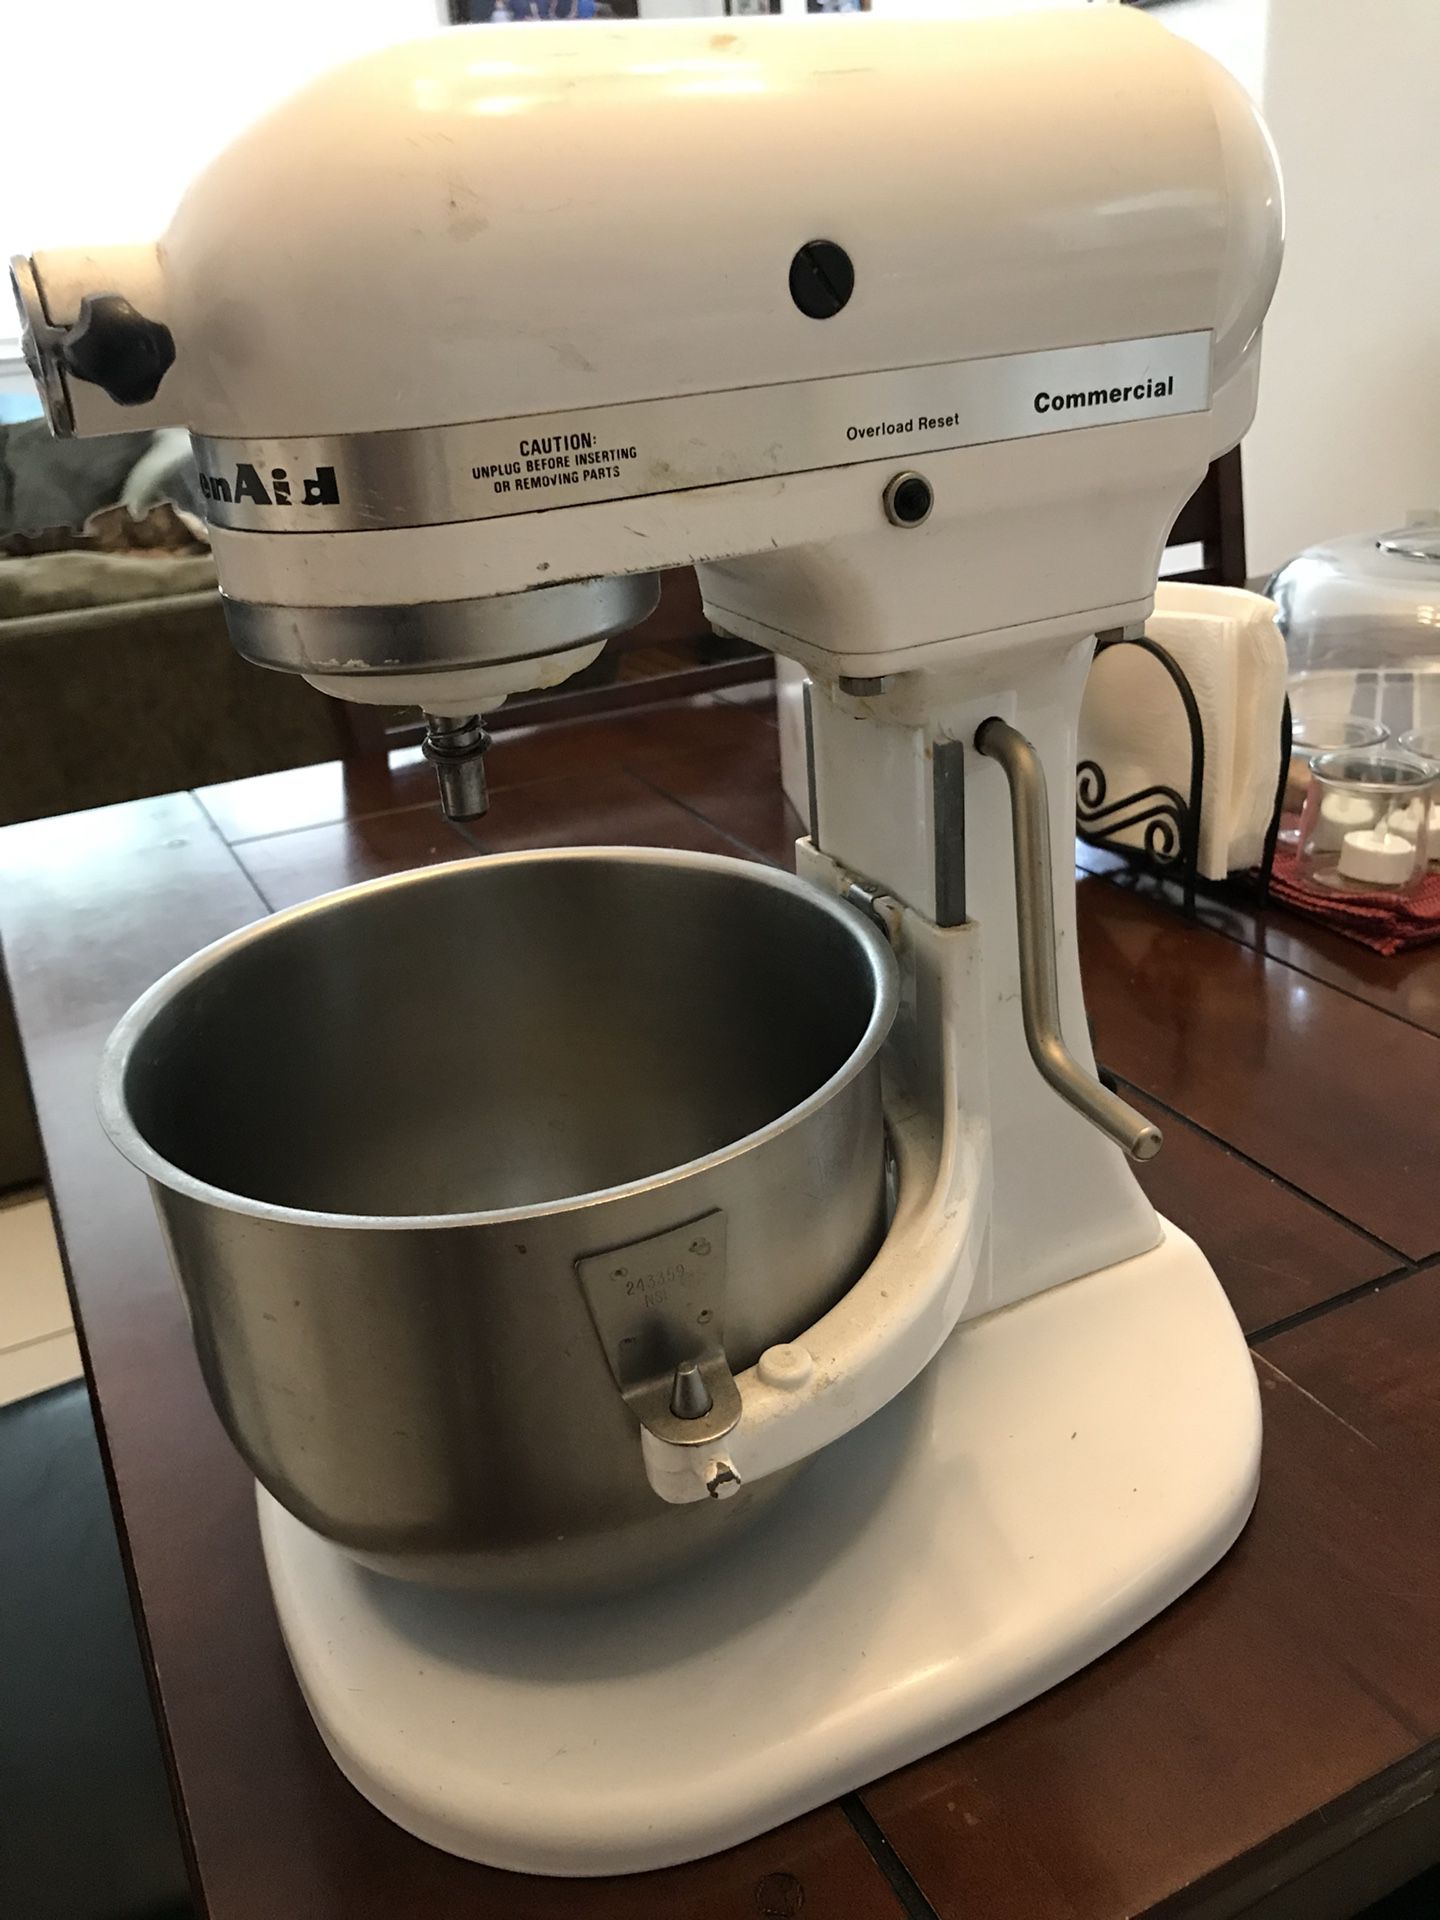 Kitchen Aid Commercial Stand Mixer for Sale in Los Angeles, CA - OfferUp